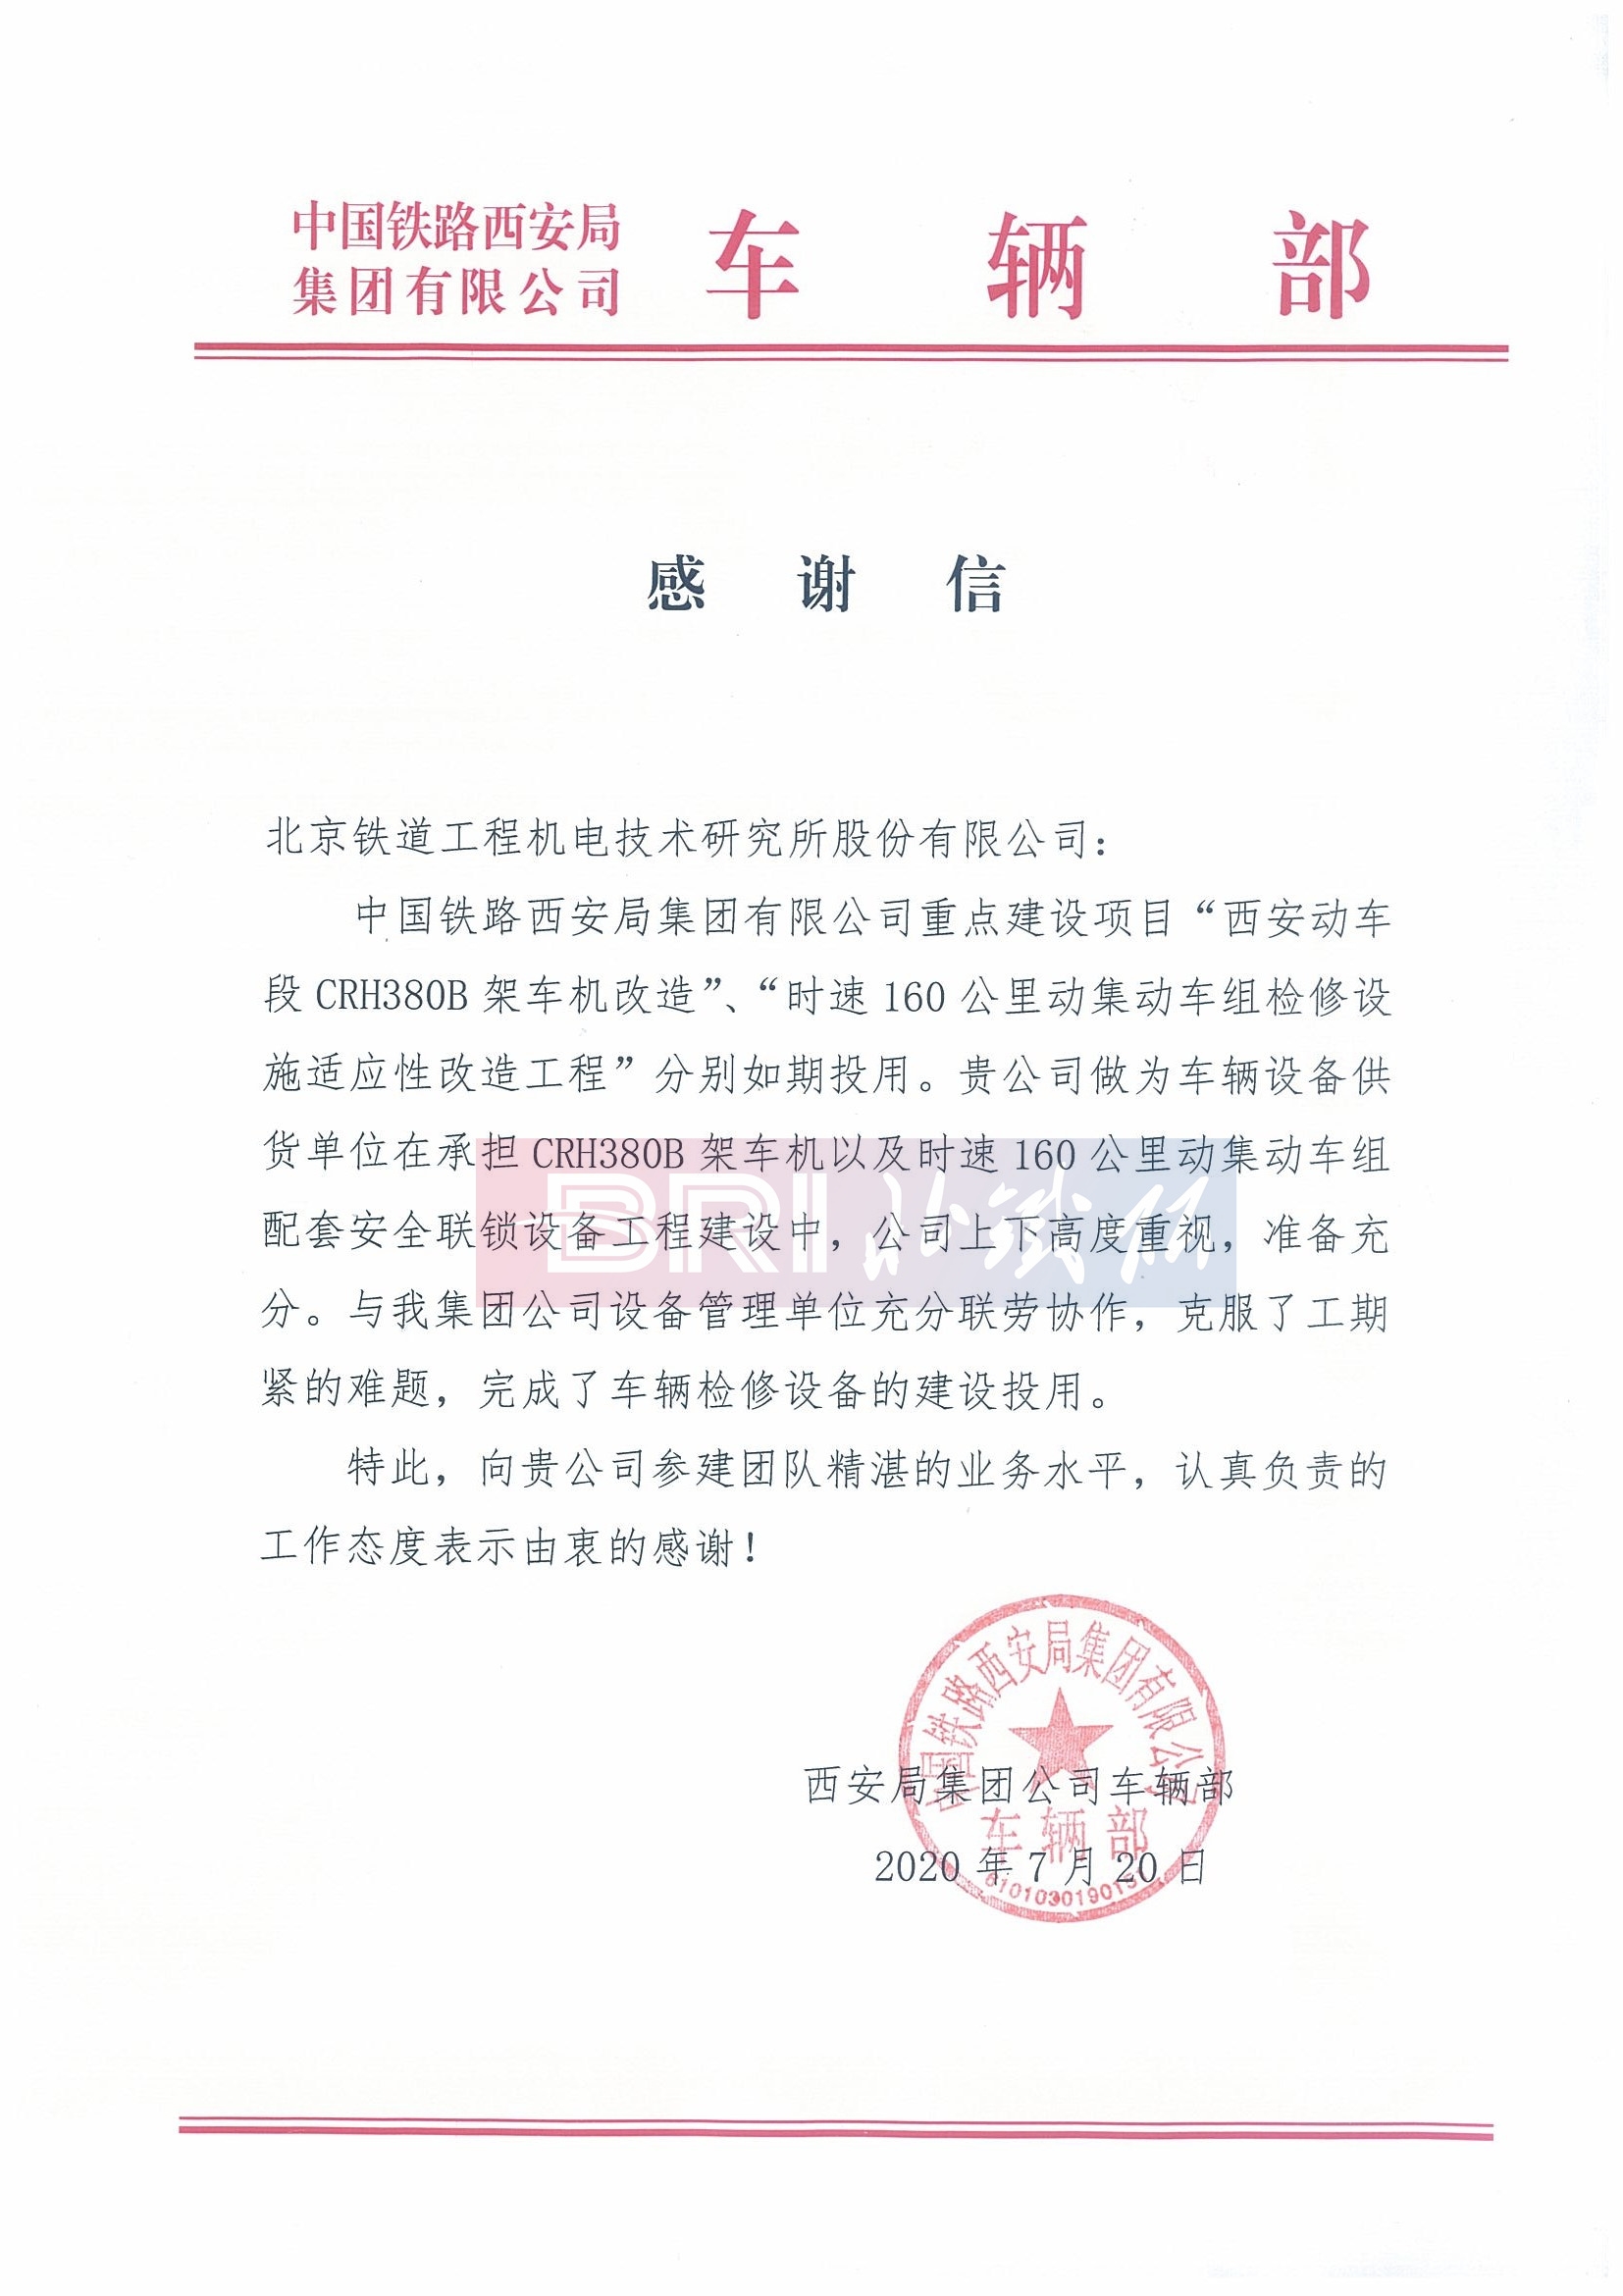 The thank you Letter from Vehicle Department of China Railway Xi&#039;an Group Co., Ltd